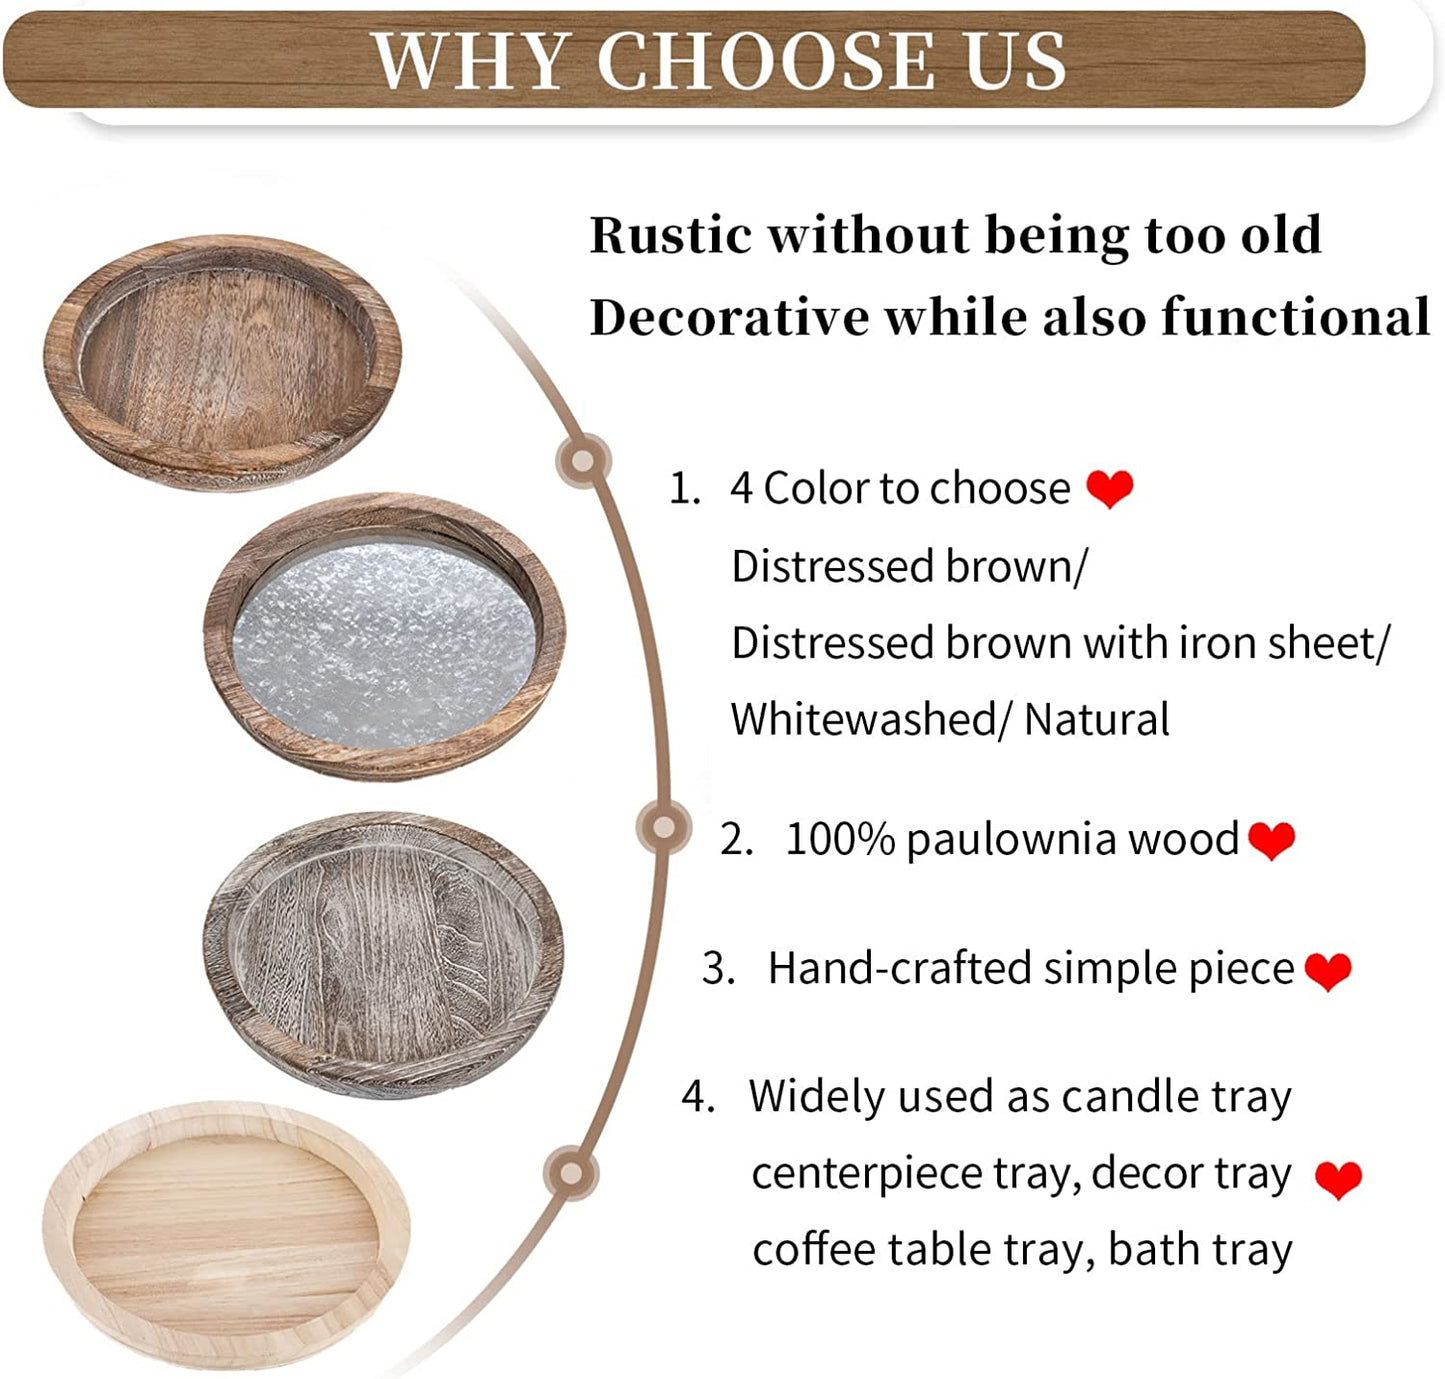 Rustic Wooden Serving Tray - Round Wood Butler Decorative Tray Vintage Centerpiece Candle Holder Trays Farmhouse Ottoman Tray for Kitchen Countertop Home Decor for Coffee Table